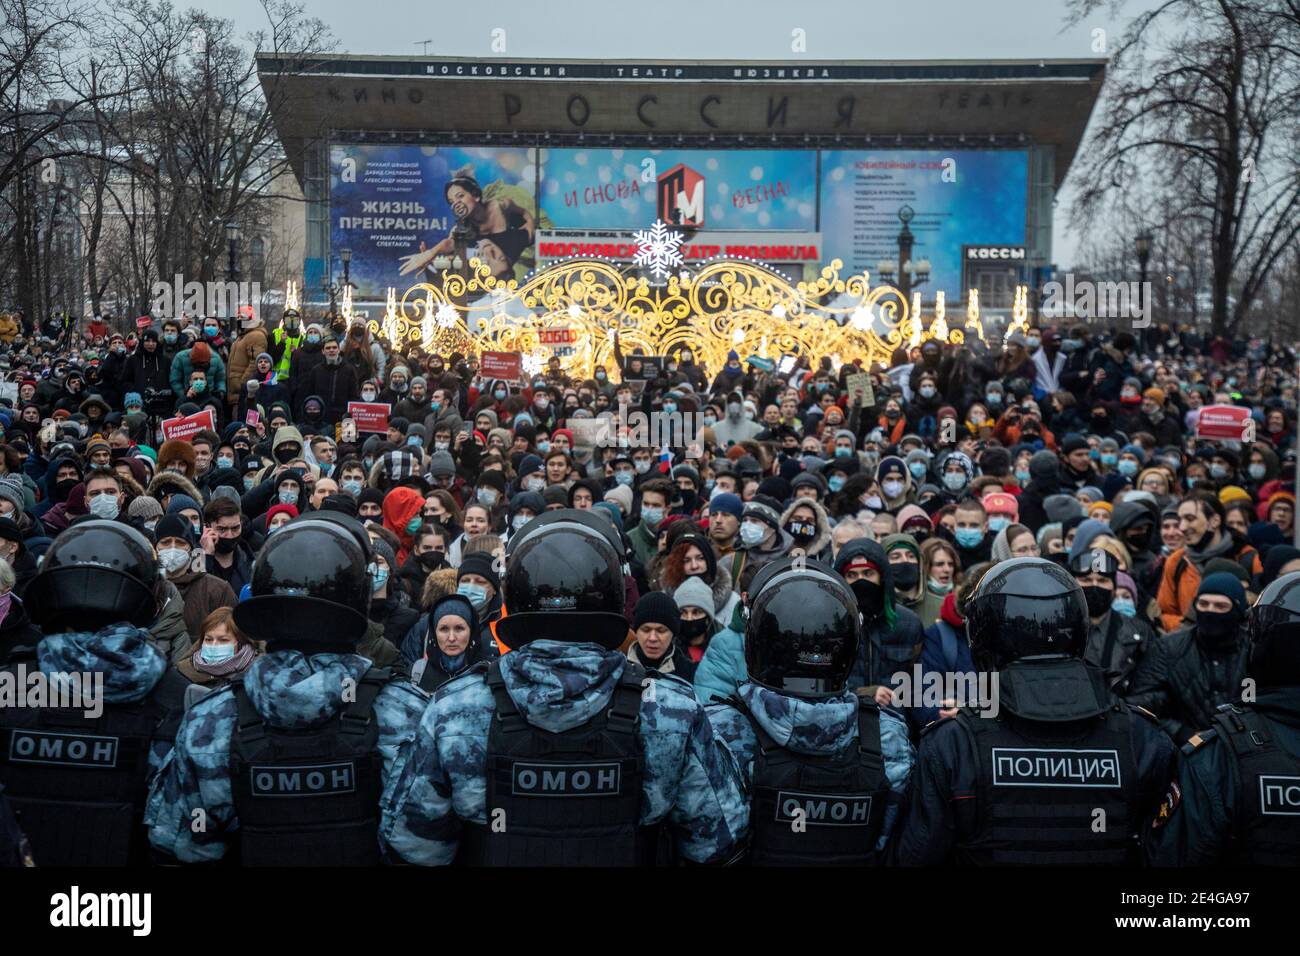 Moscow, Russia. 23rd of January, 2021 General view of the Pushkinskaya square where crowds gather in support of Alexey Navalny, Russian opposition leader, during a demonstration in Moscow, Russia Stock Photo